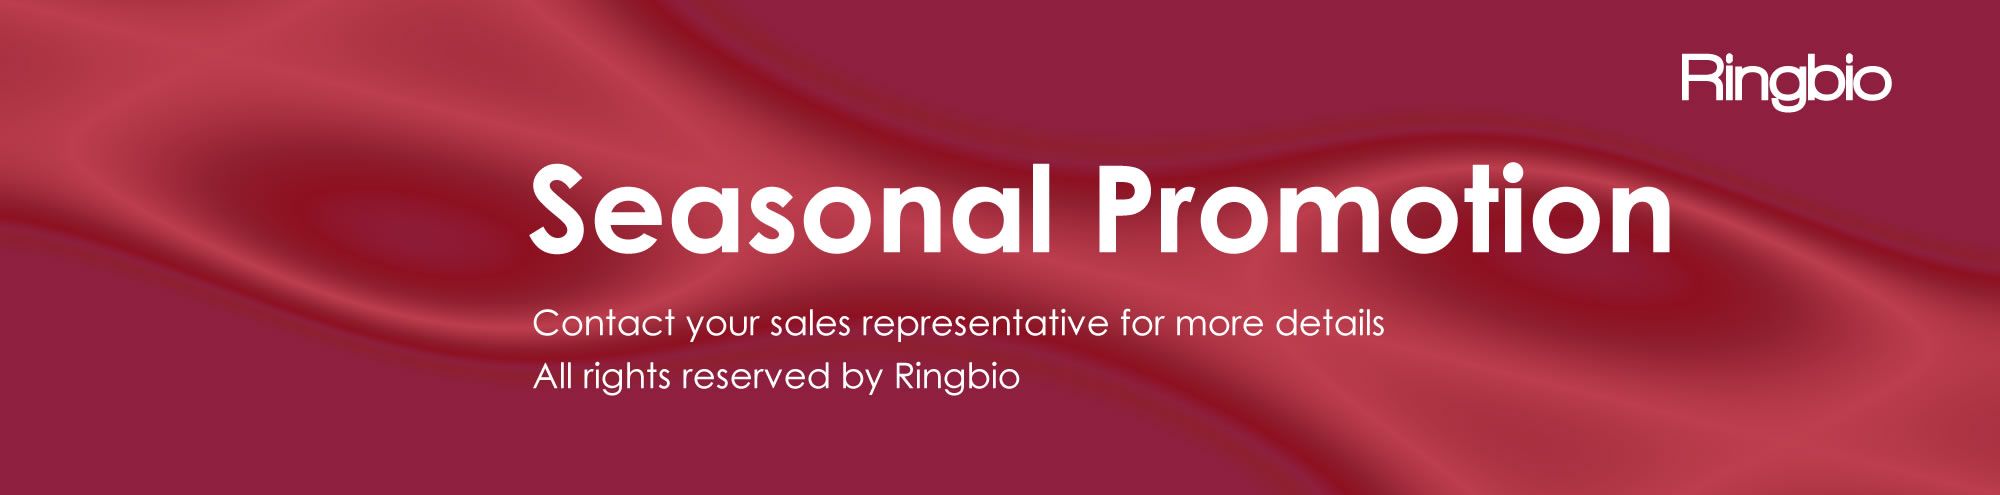 Ringbio is launching a seasonal promotion from November to December